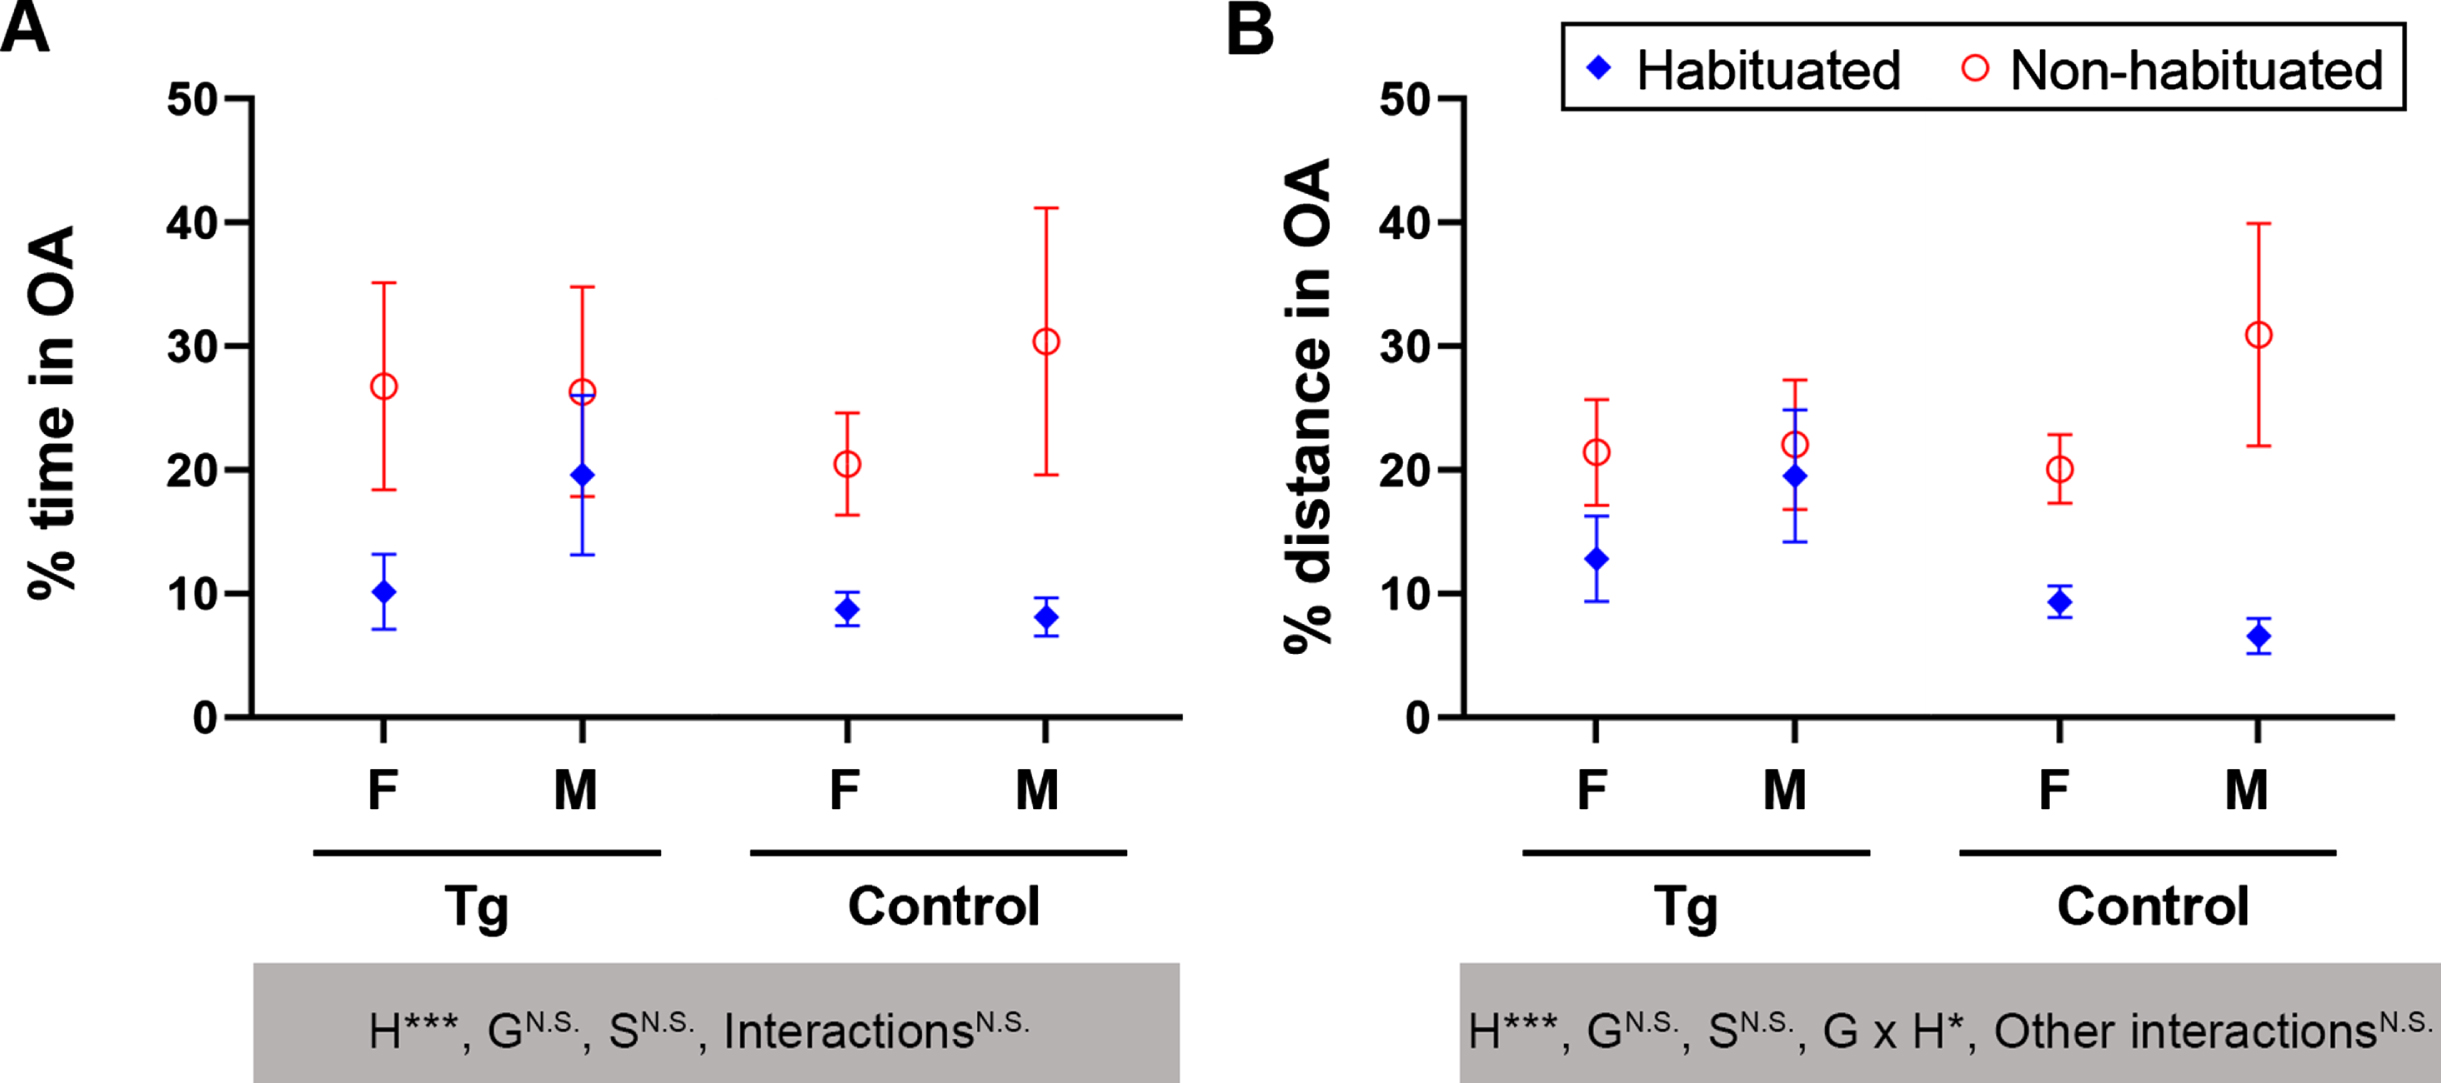 Prior handling-habituation markedly reduces the percentages of time (A) and distance traveled (B) in open arms of the elevated plus maze in middle-aged 3×Tg-AD and control mice. The mice were ∼12 months of age when tested in the maze. Data are expressed as mean±SEM (n = 5–11 mice/condition) and analyzed with three-way ANOVA. *p < 0.05, ***p < 0.001. The shaded boxes show corresponding ANOVA results, including main effects and interactions. F, female; G, genotype; H, habituation; M, male; N.S., non-significant; S, sex.